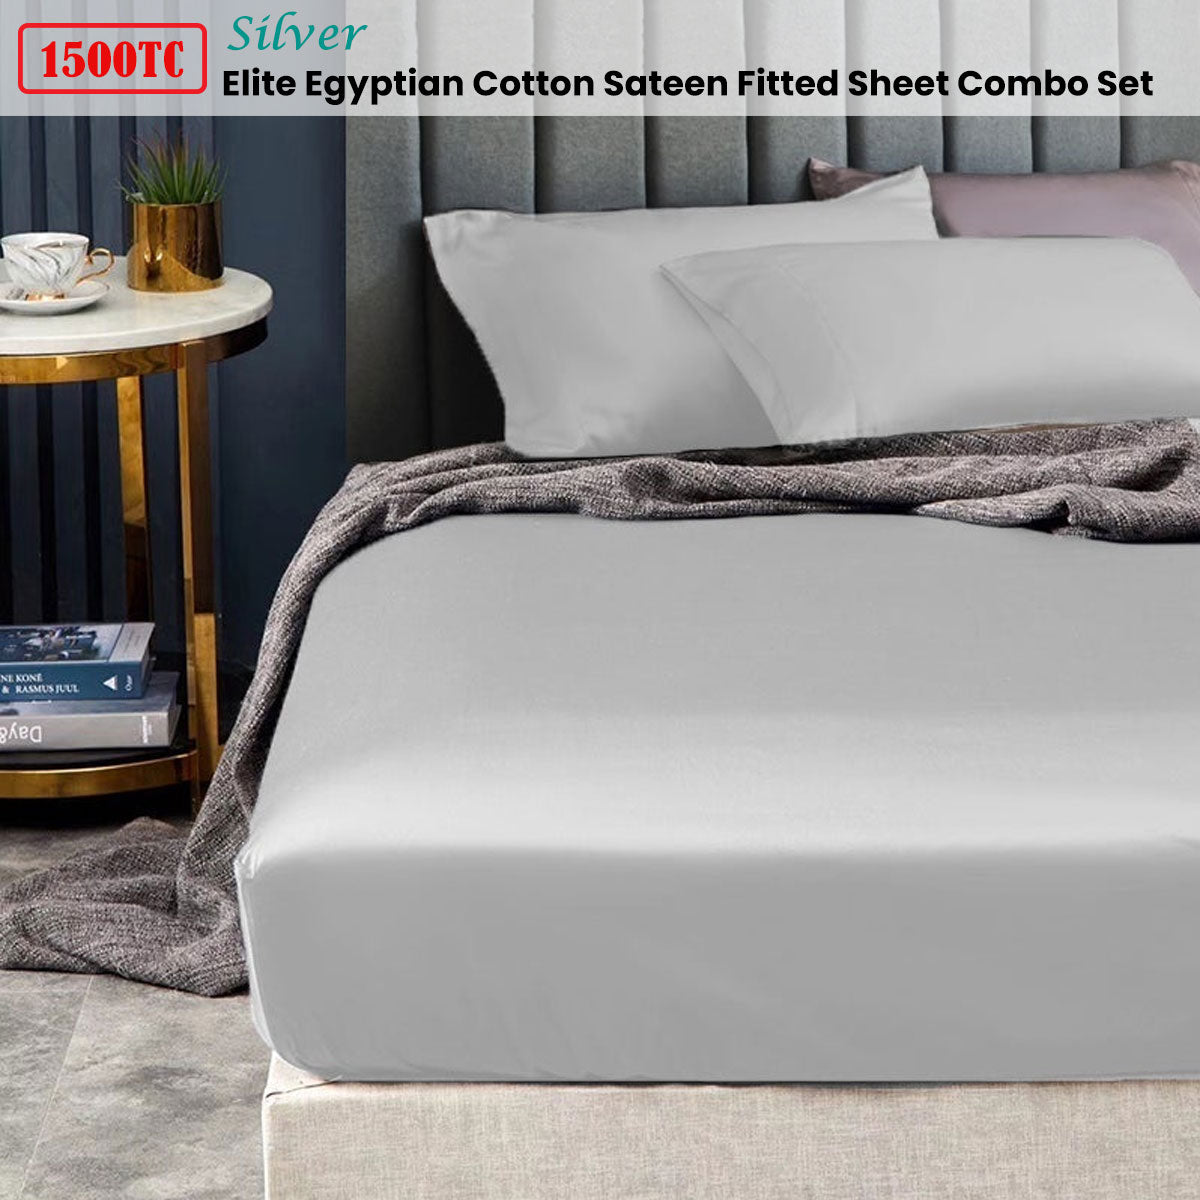 1500TC Elite Egyptian Cotton Sateen Fitted Sheet Combo Set Silver Mega Queen